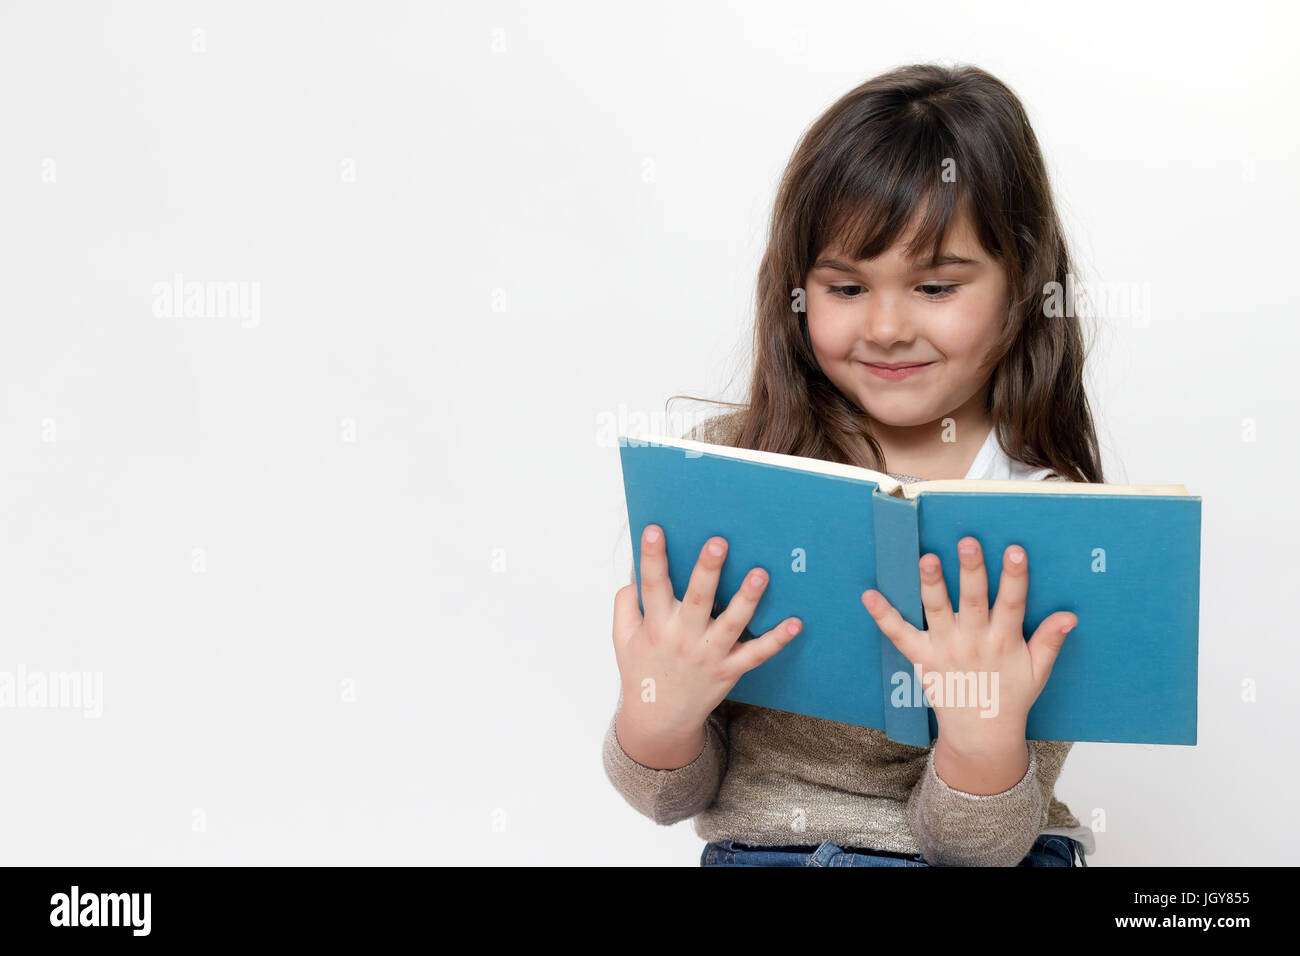 Front view of smiling long haired little girl holding and reading a book. All is on the light gray background. Stock Photo